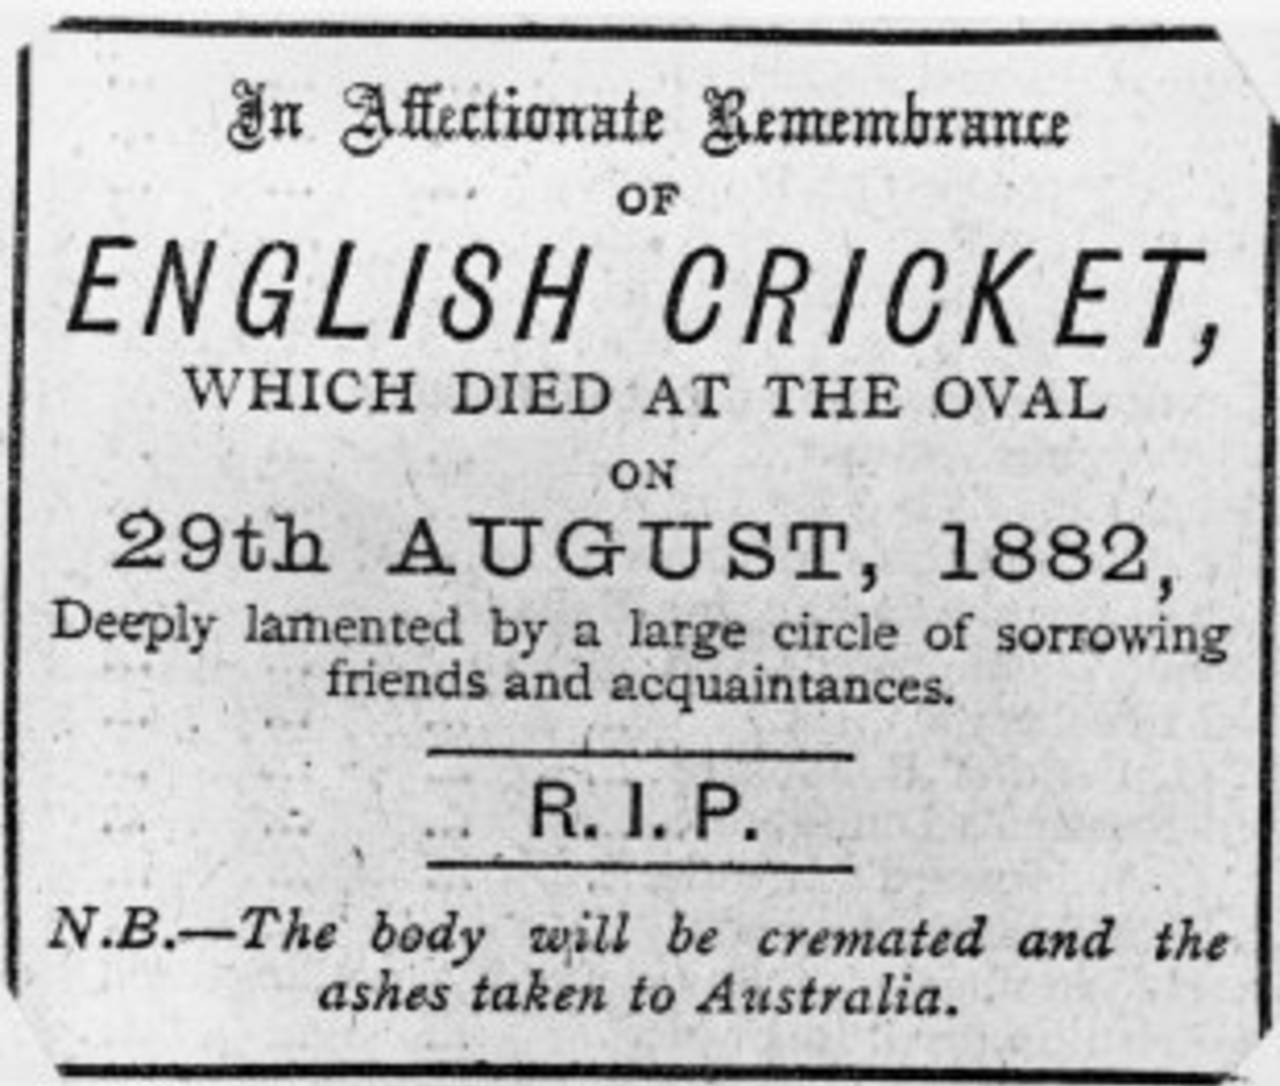 "In Affectionate Remembrance of English Cricket, which died at the Oval on 29th August 1882, Deeply lamented by a large circle of sorrowing friends and acquaintances / R.I.P. / N.B. - The body will be cremated and the ashes taken to Australia." The Sporting Times, September 1882